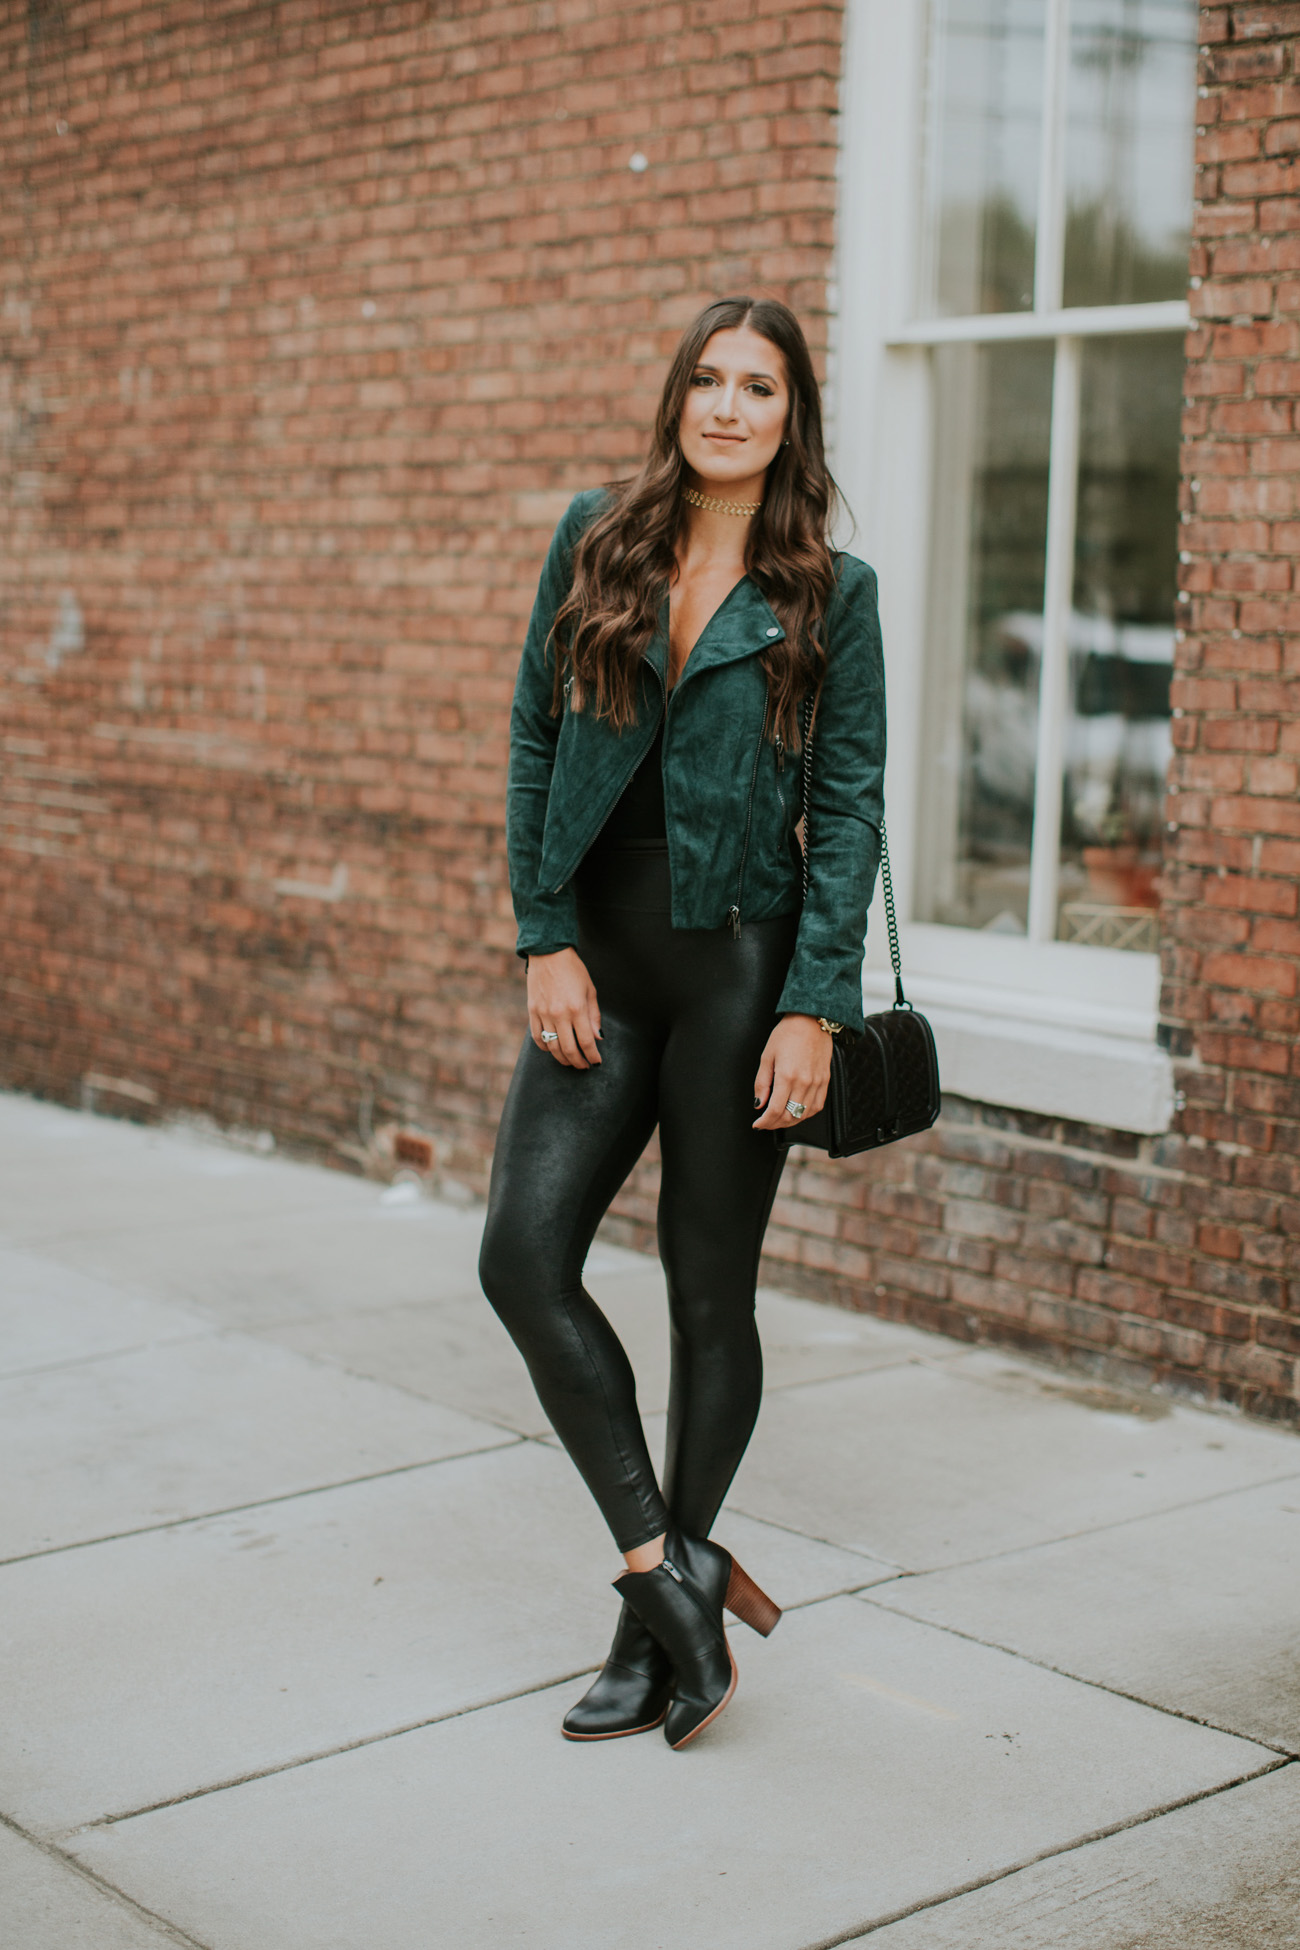 OOTD 2.13.18: Suede Jacket and Faux Leather Leggings